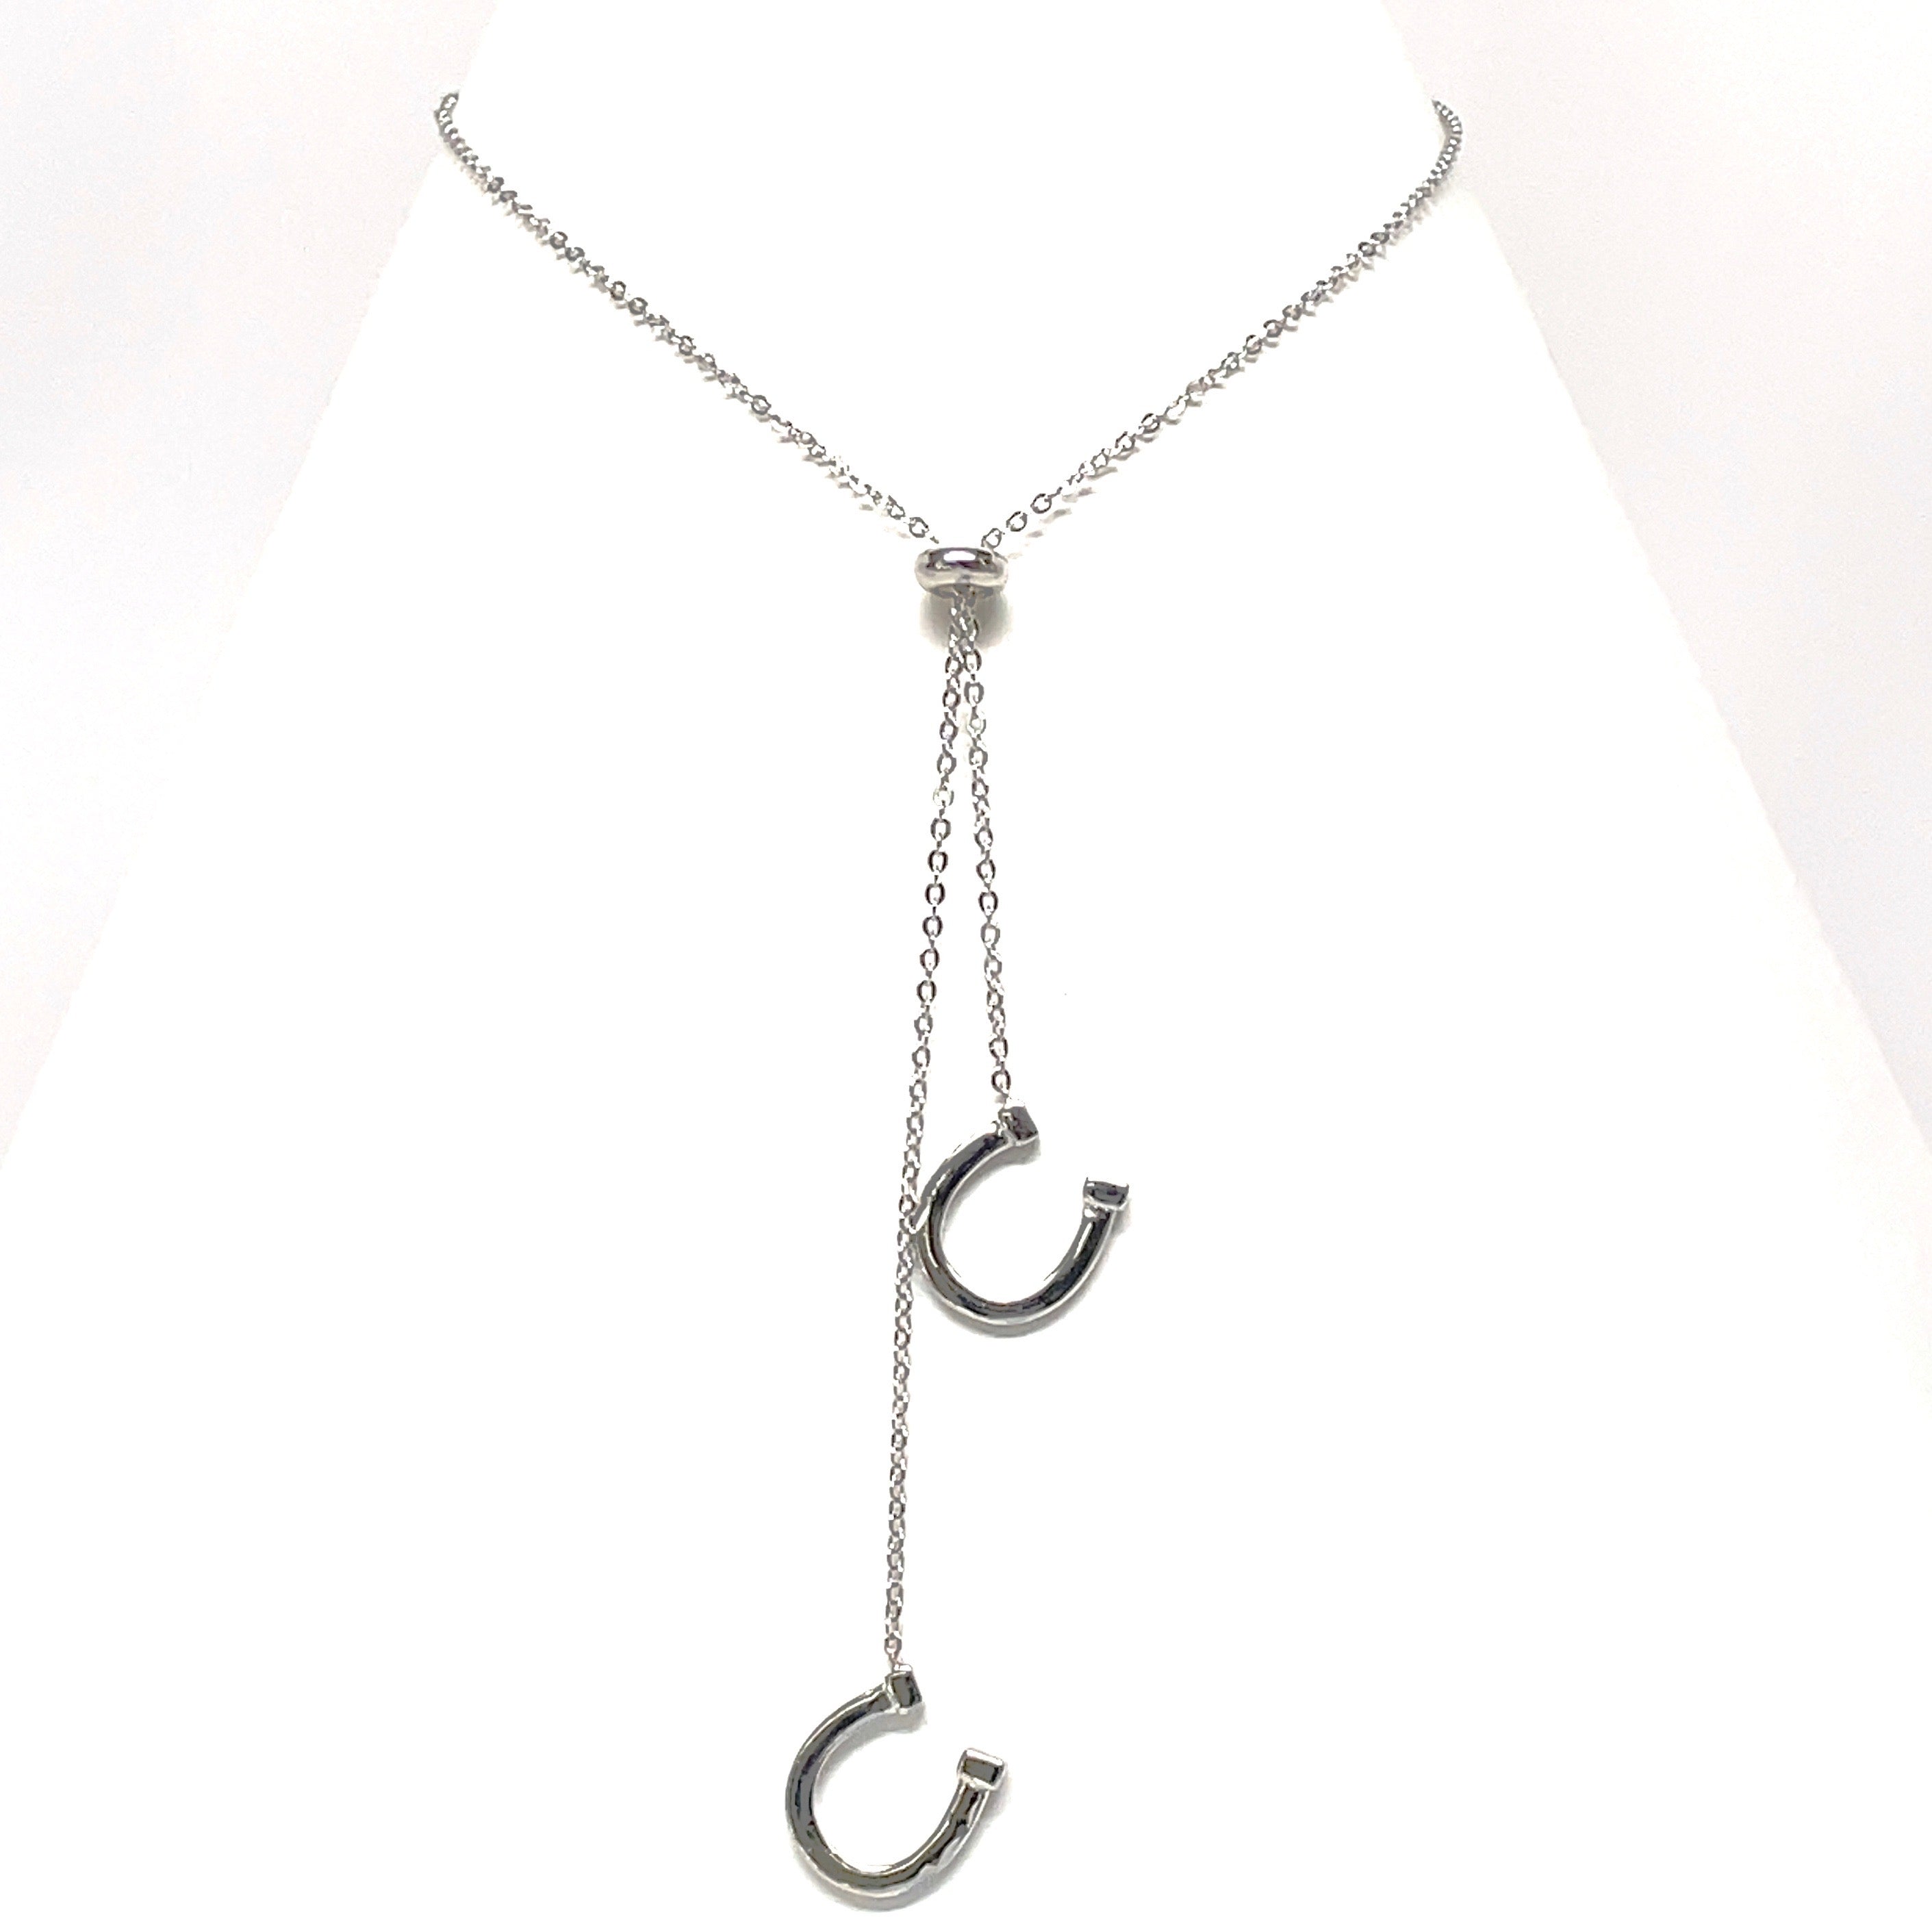 Sterling silver lucky horseshoe necklace